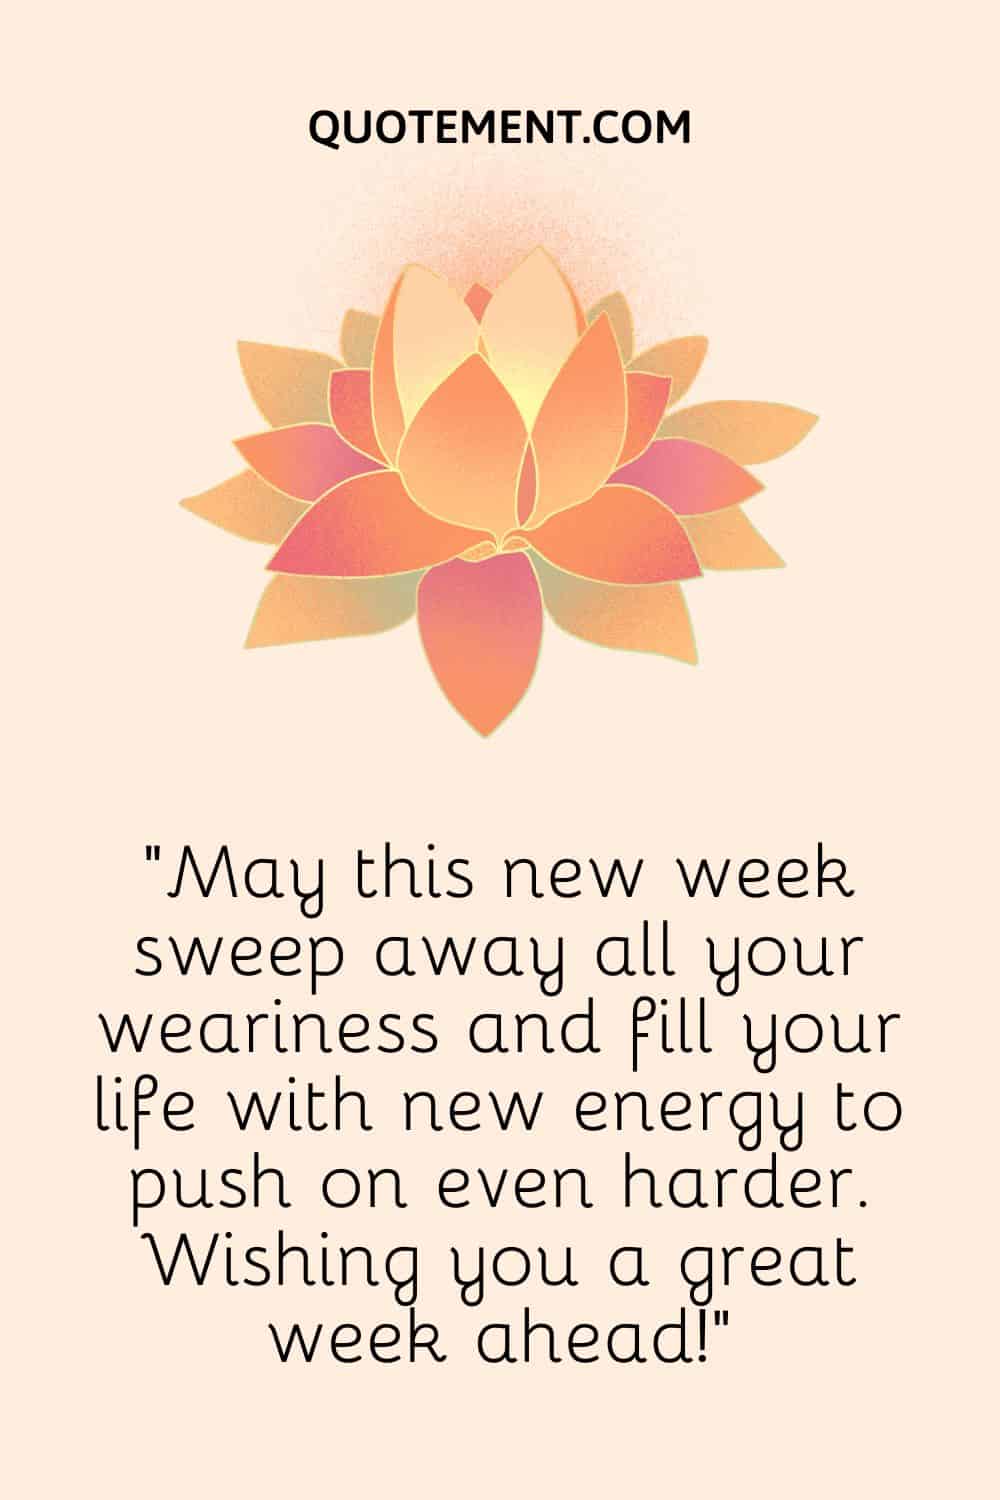 May this new week sweep away all your weariness and fill your life